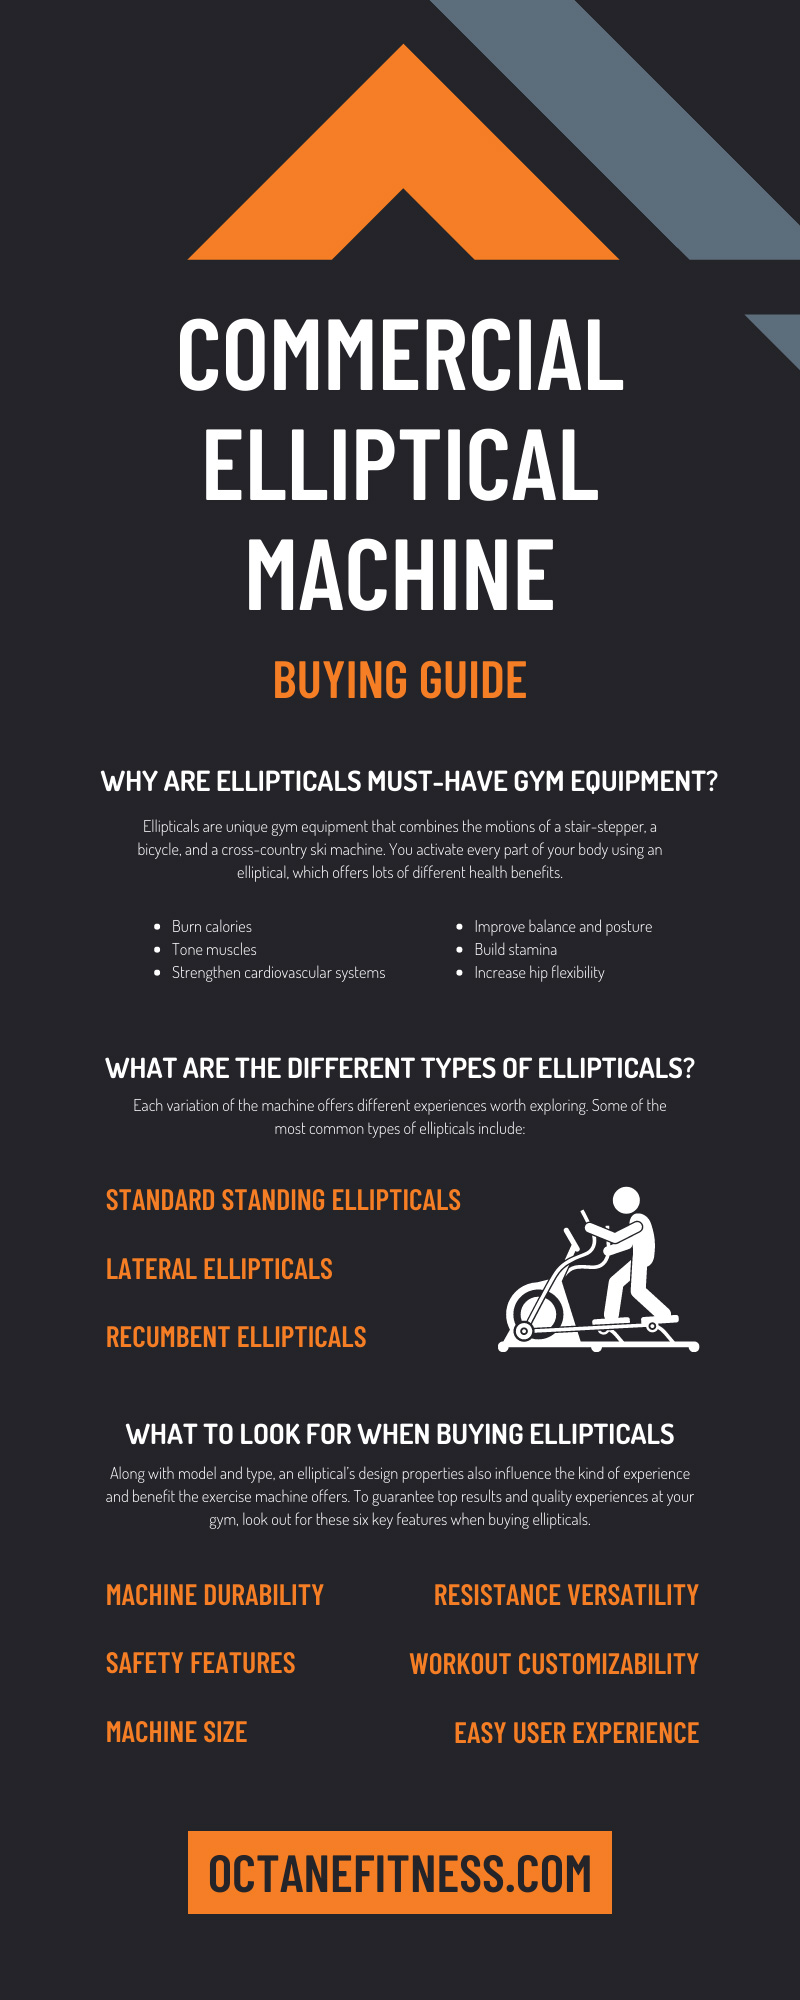 Commercial Elliptical Machine Buying Guide
